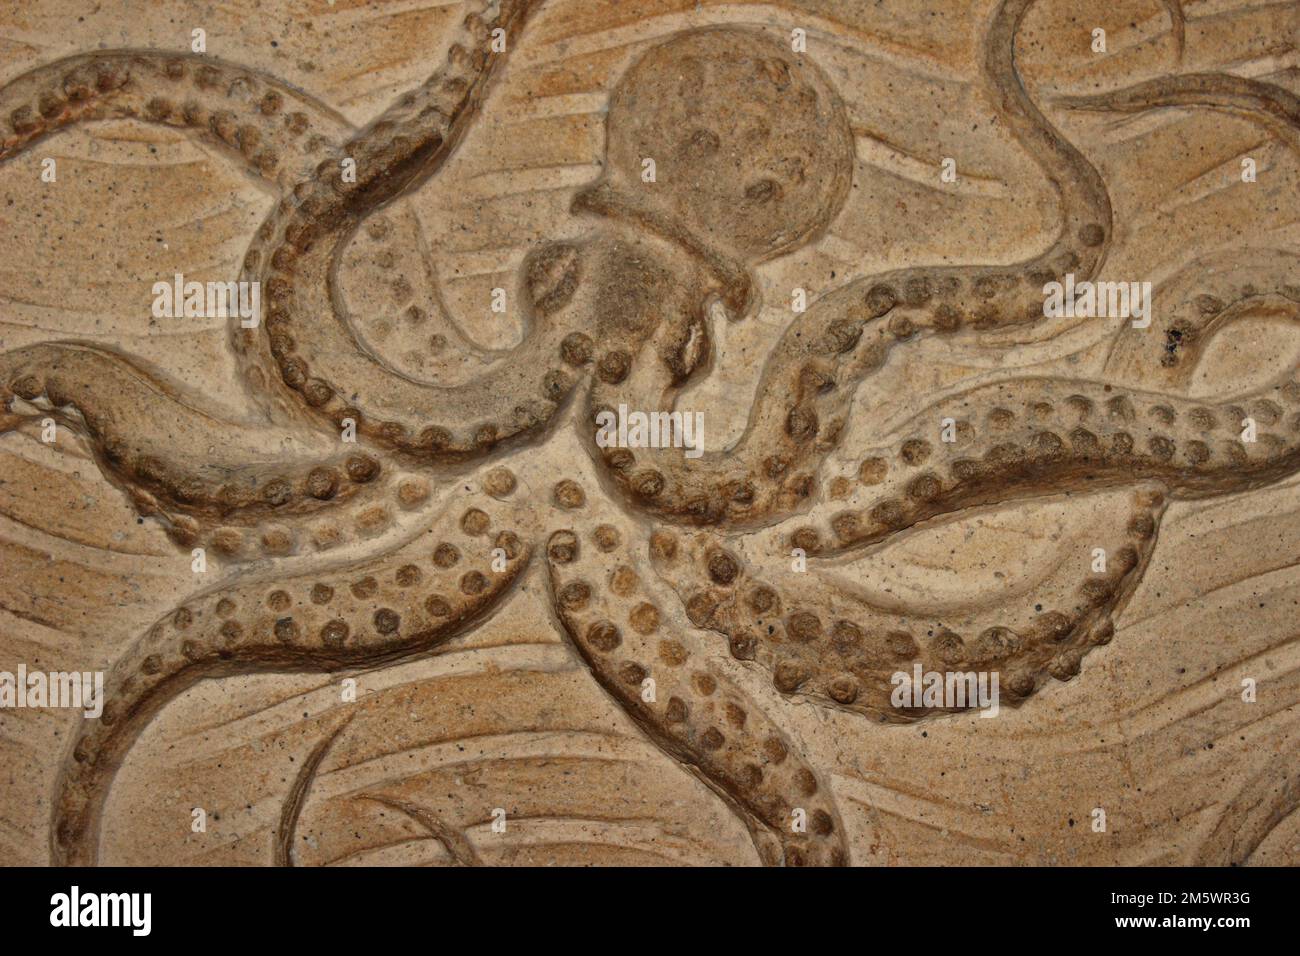 Octopus Stone Carving in London's Natural History Museum Stock Photo